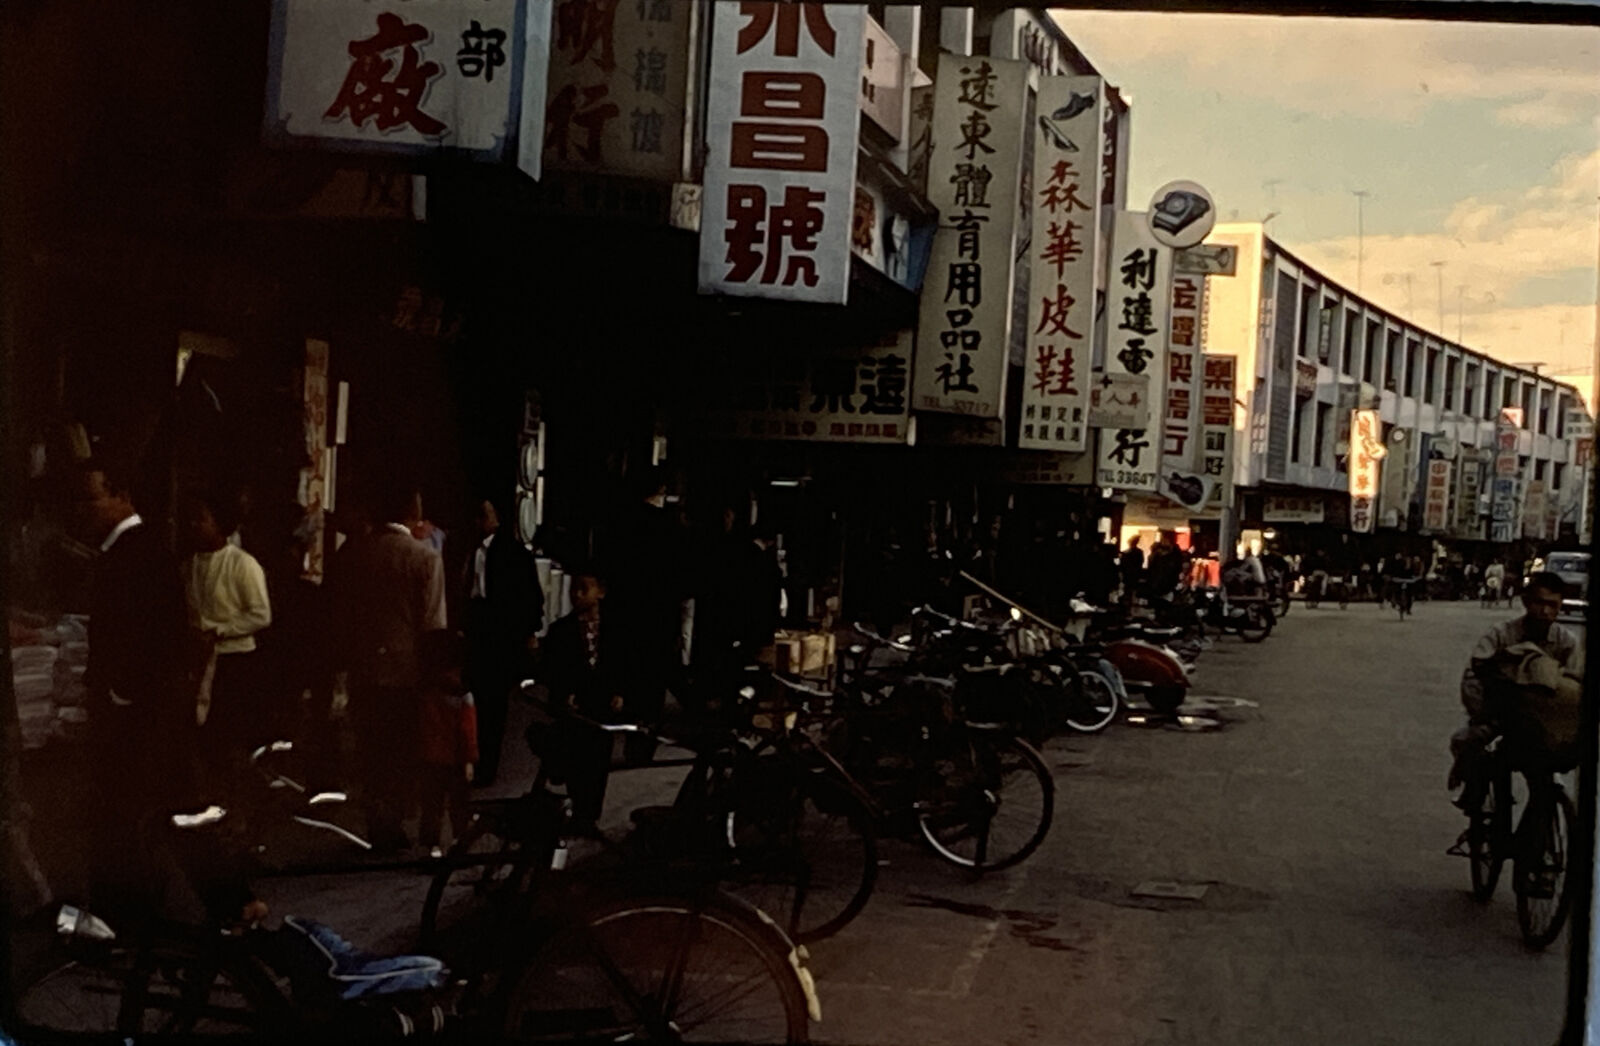 1965 Kodachrome Slide China possibly Taiwan Street Scene Bicycles People Stores